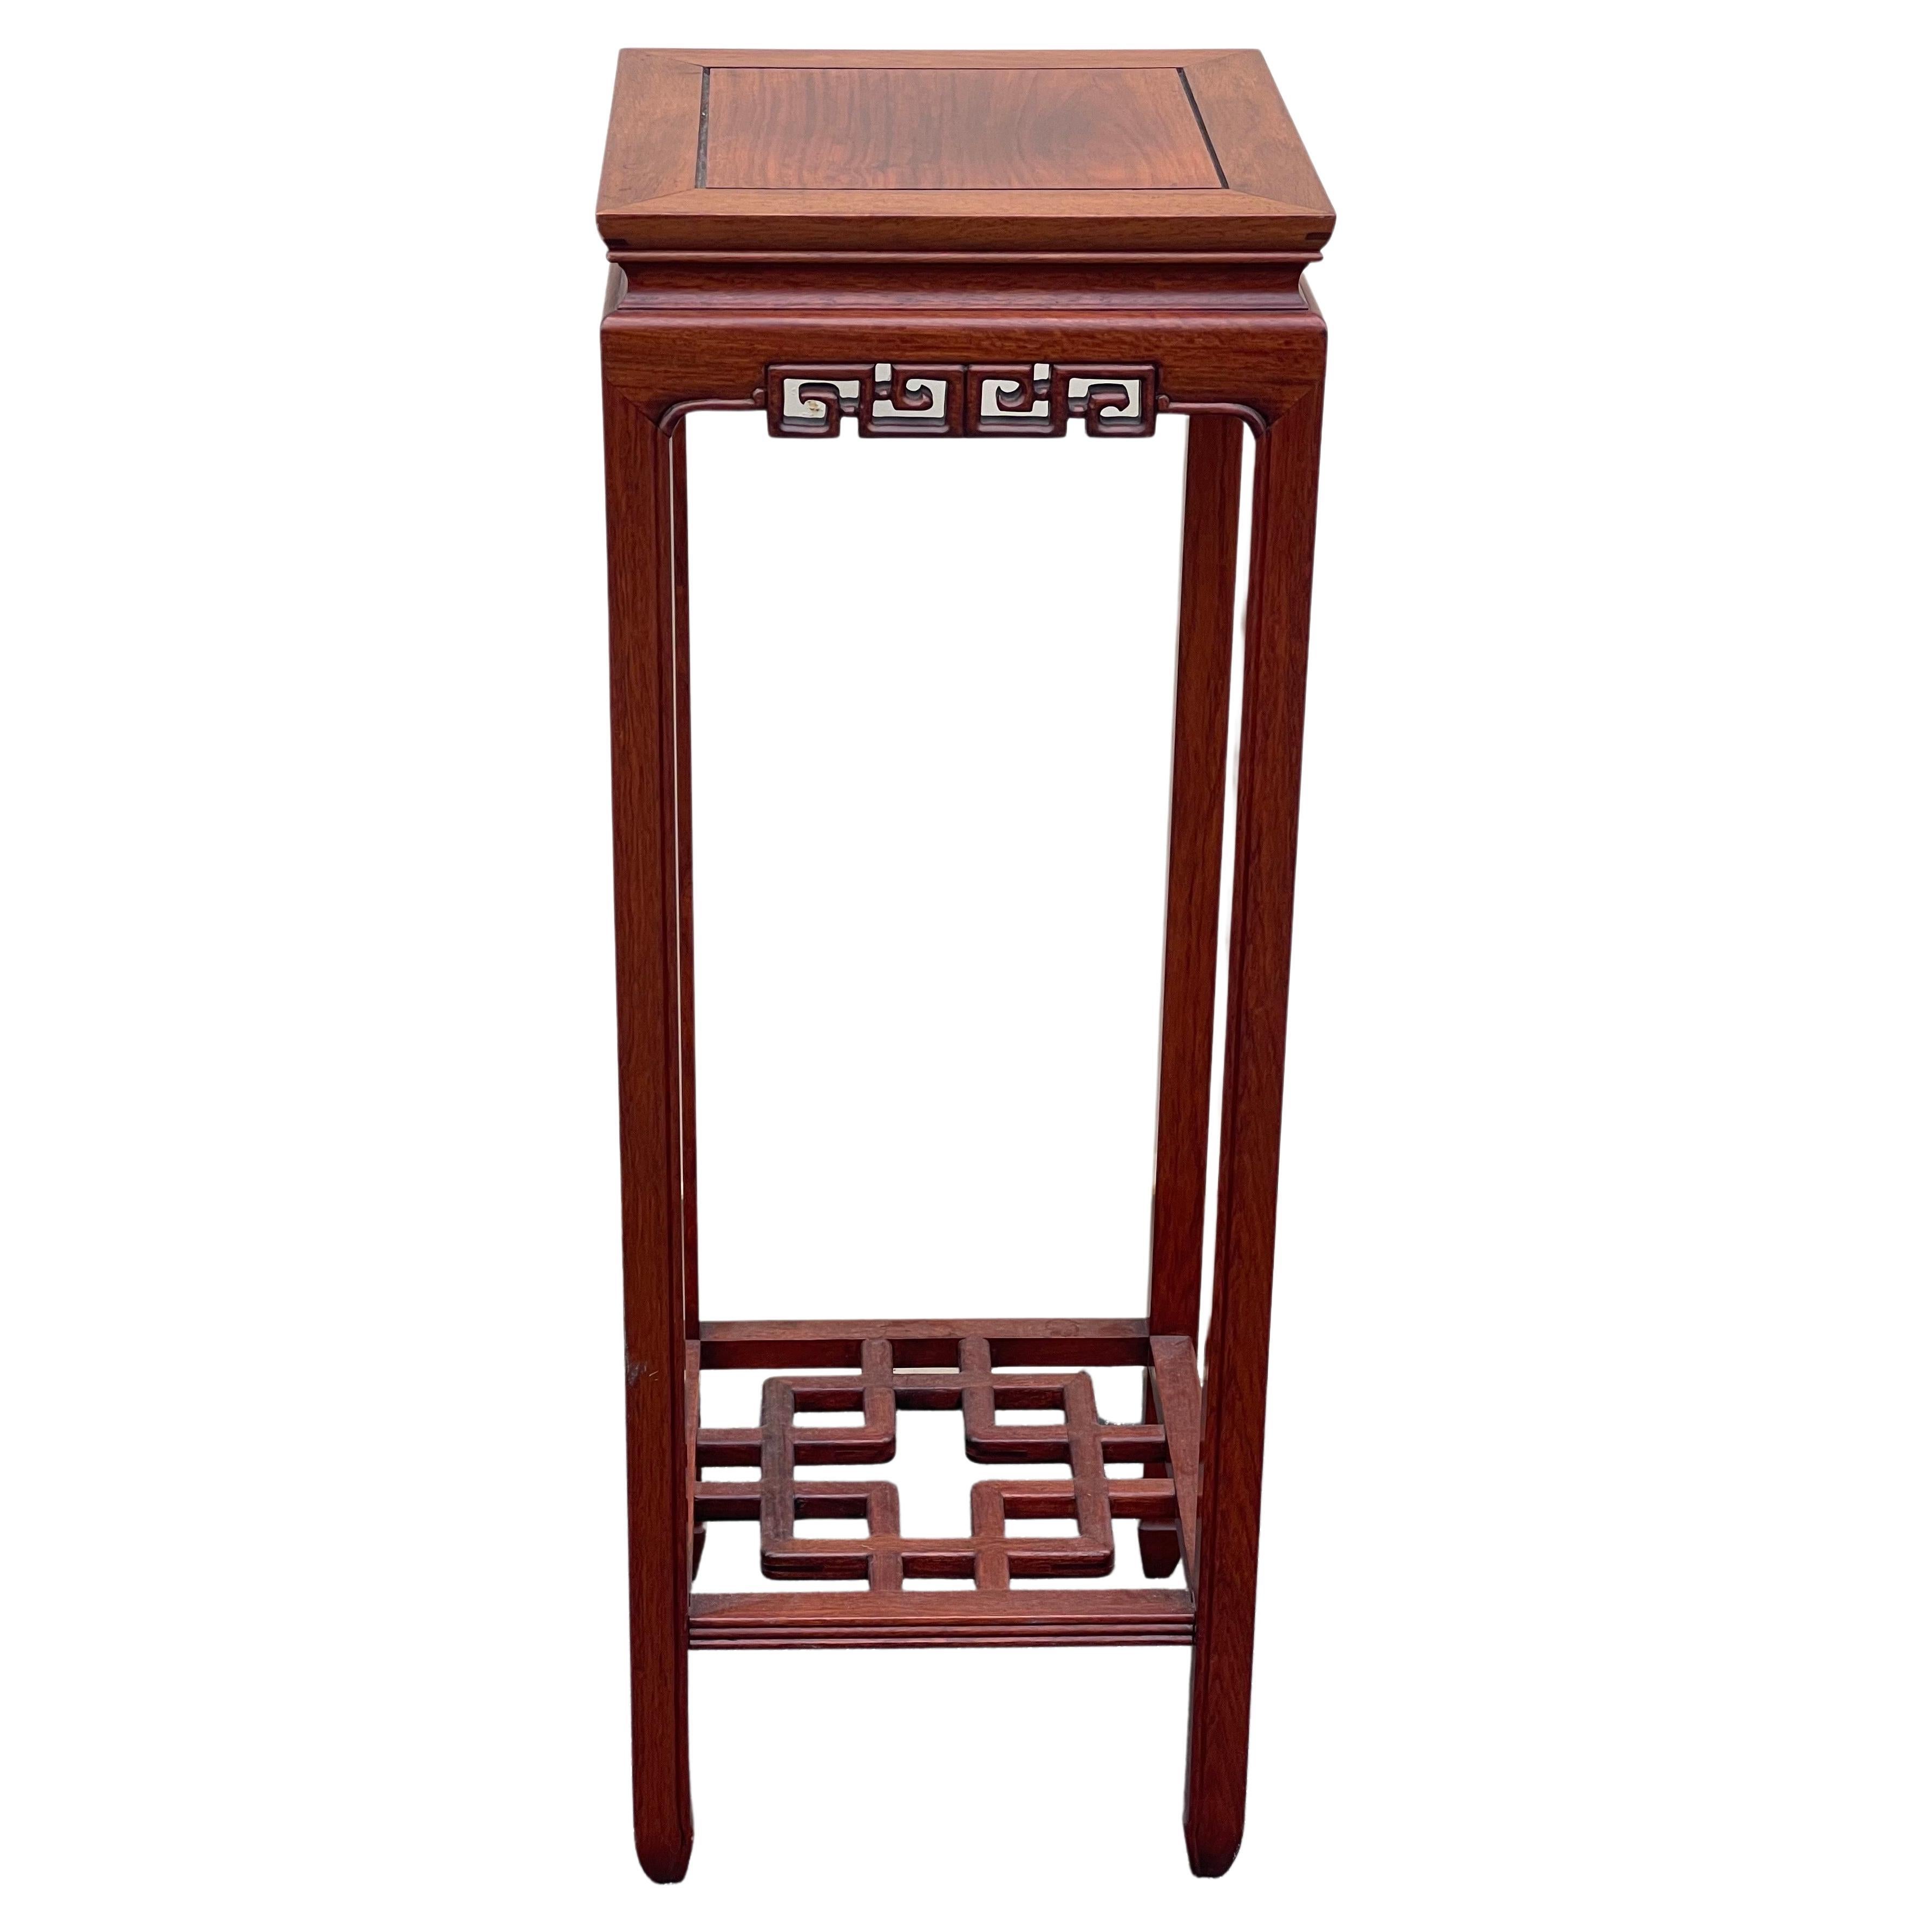 High quality vintage Chinese carved rosewood plant stand / pedestal, circa 1970s. The stand is in very good vintage condition and measures 11.5